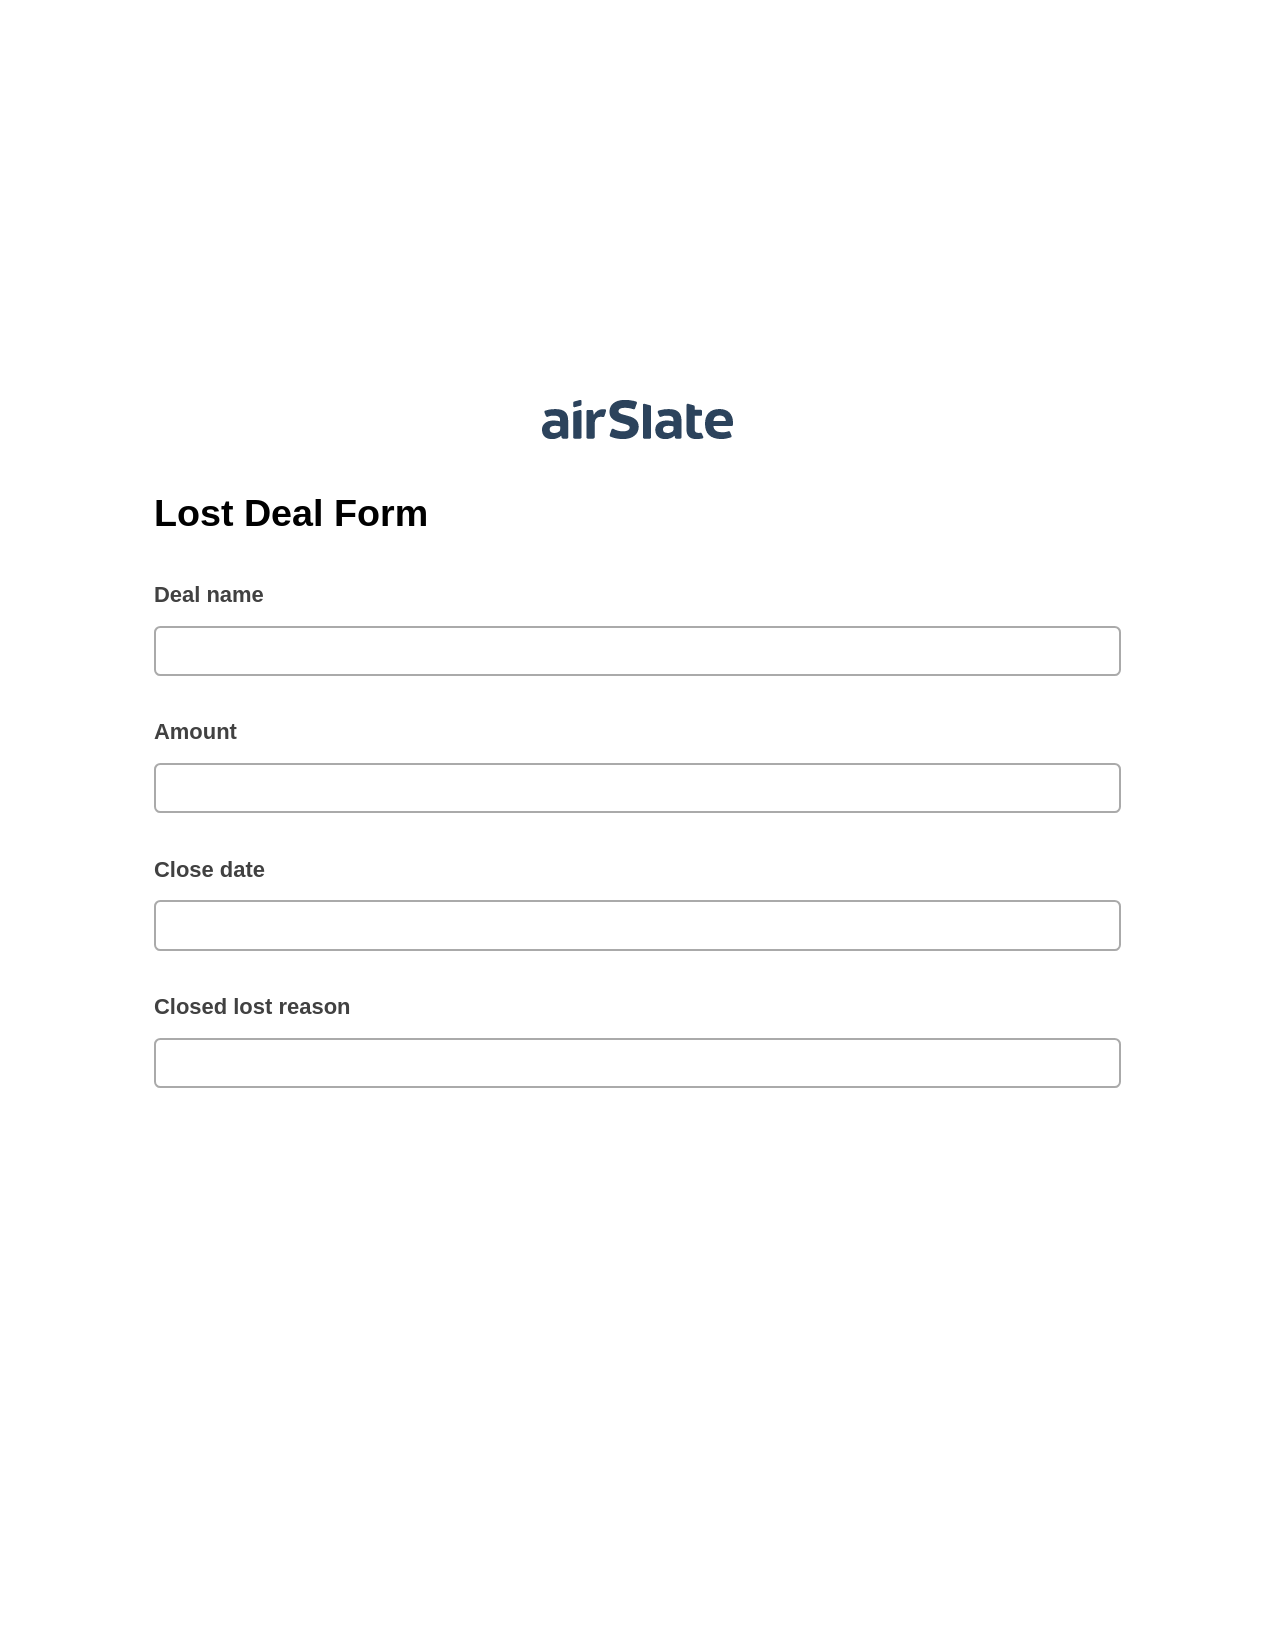 Lost Deal Form Pre-fill from CSV File Bot, Add Tags to Slate Bot, Post-finish Document Bot